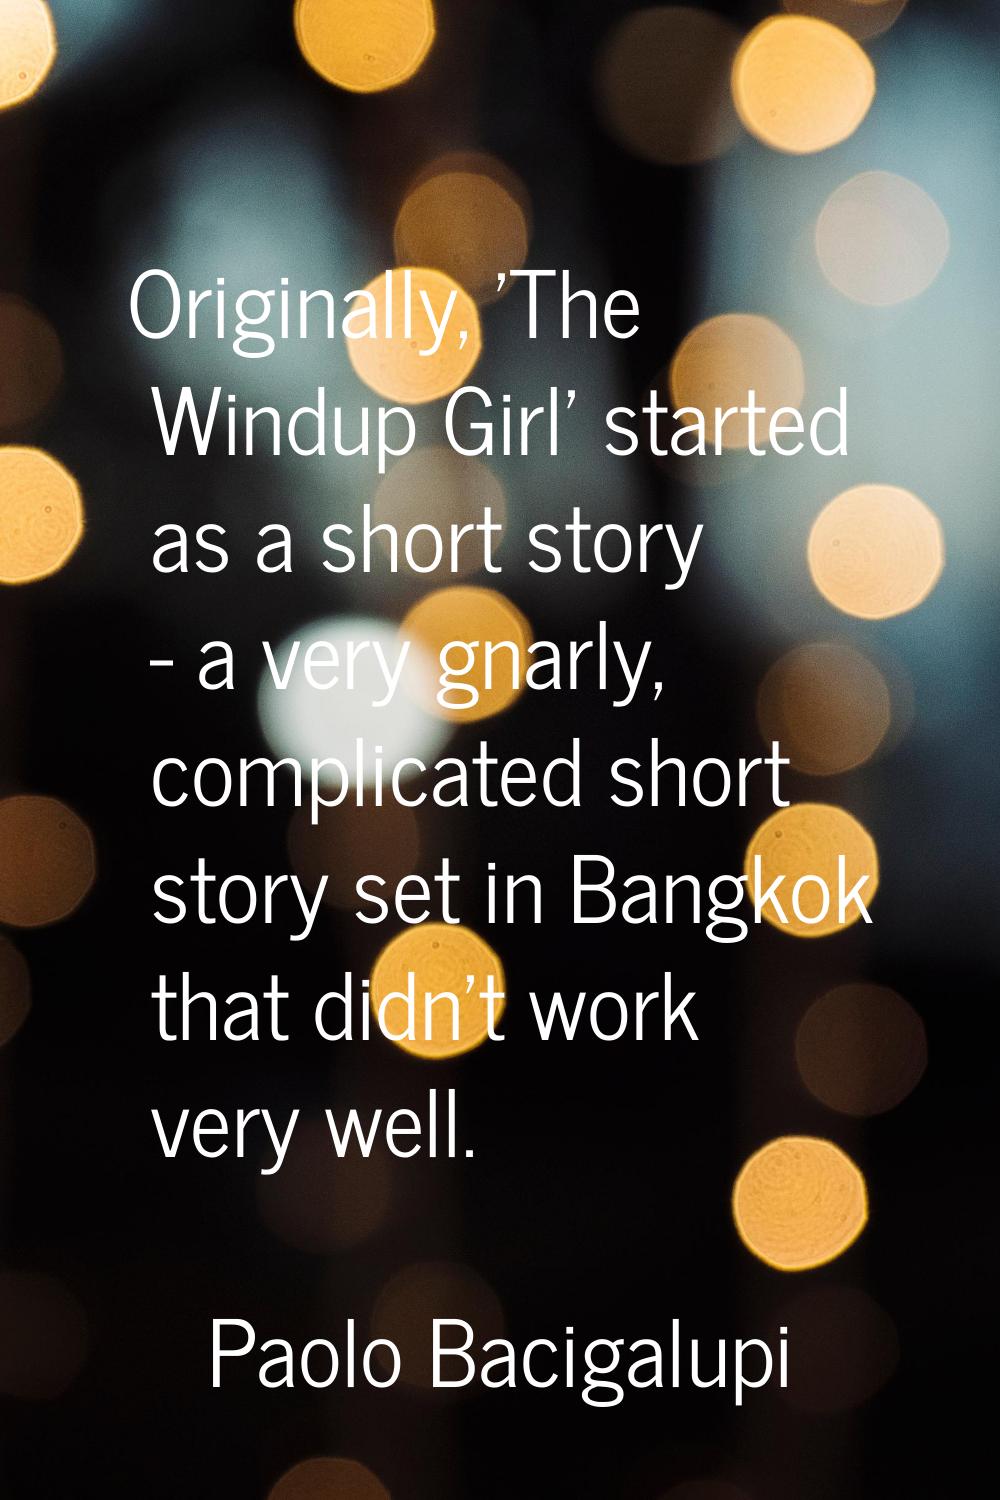 Originally, 'The Windup Girl' started as a short story - a very gnarly, complicated short story set